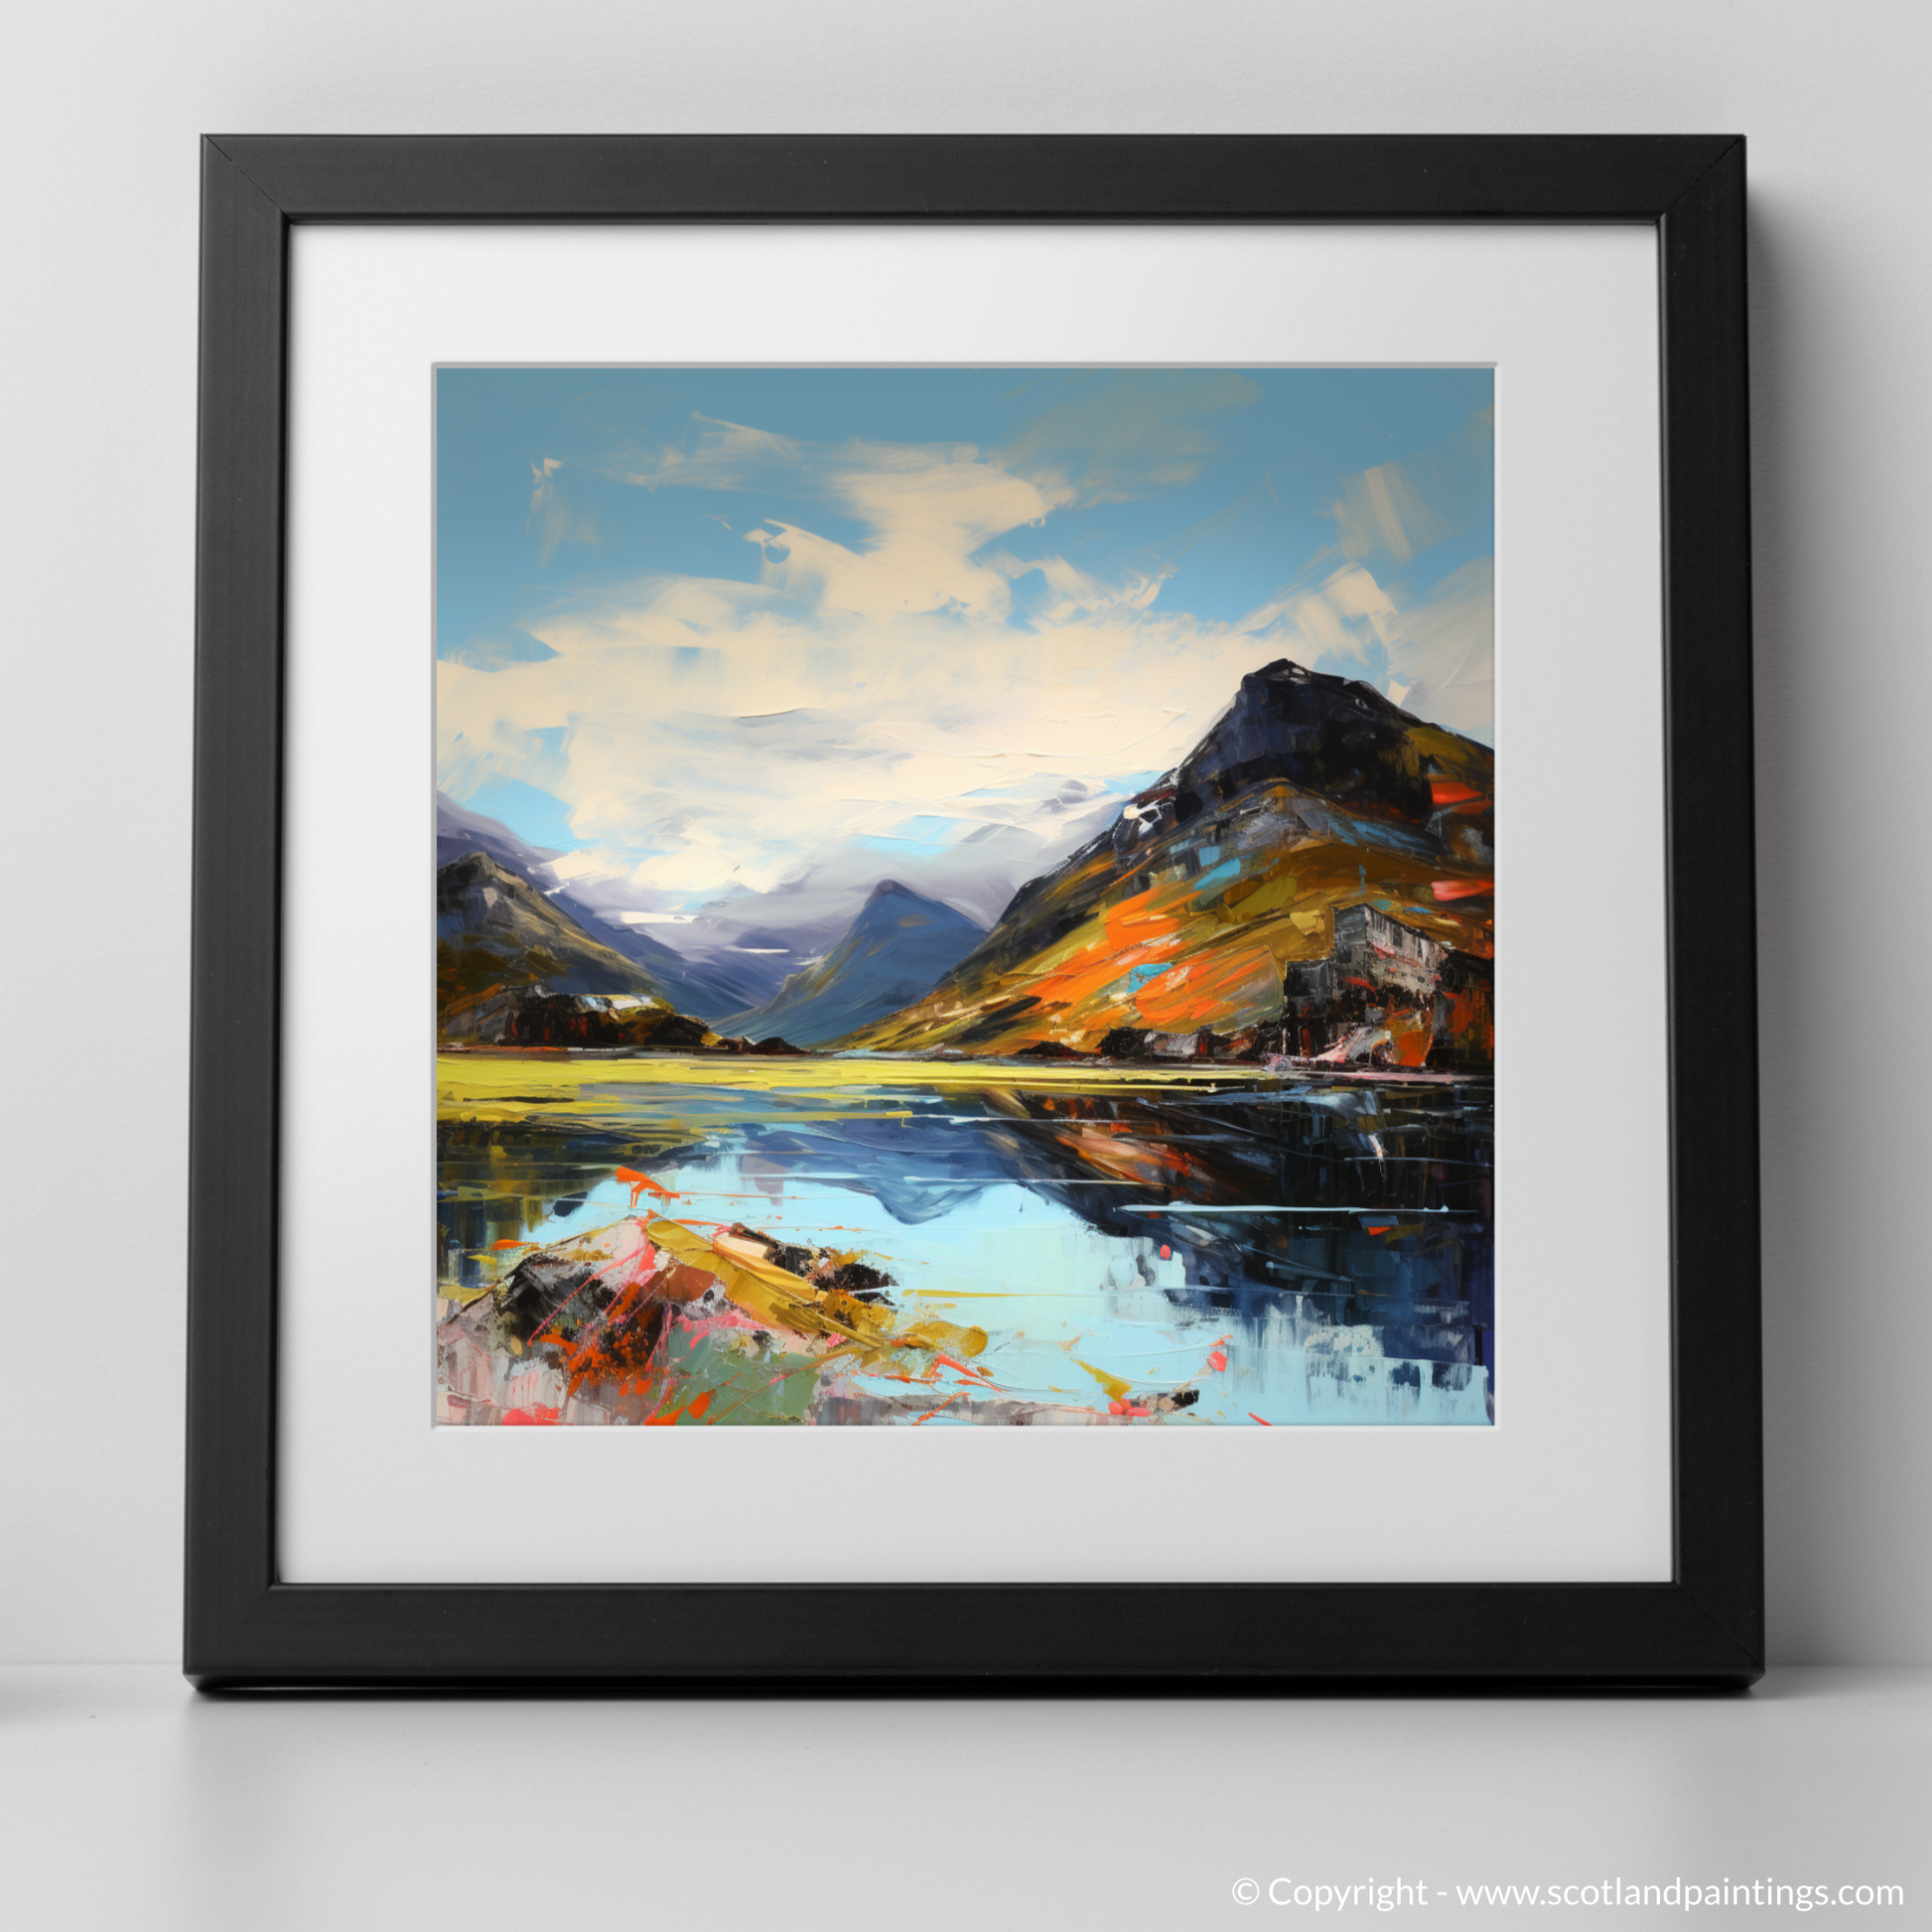 Art Print of Loch Glencoul, Sutherland with a black frame